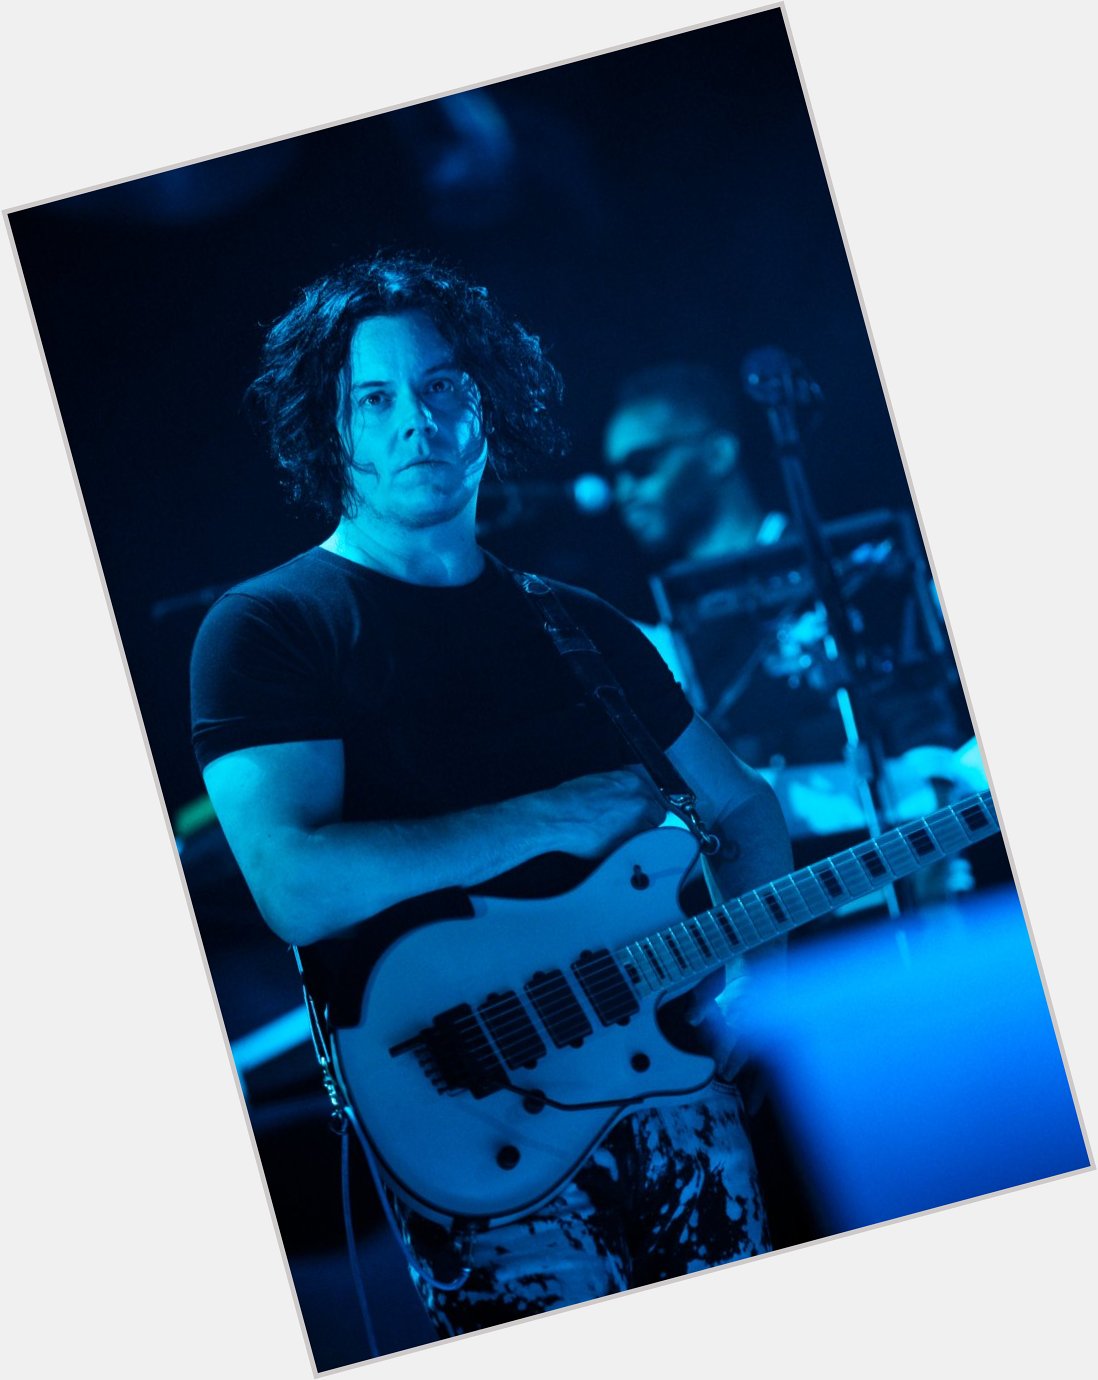 Also, Happy Birthday to Jack White! He and Aaron share the same birthday!! How cool!! 